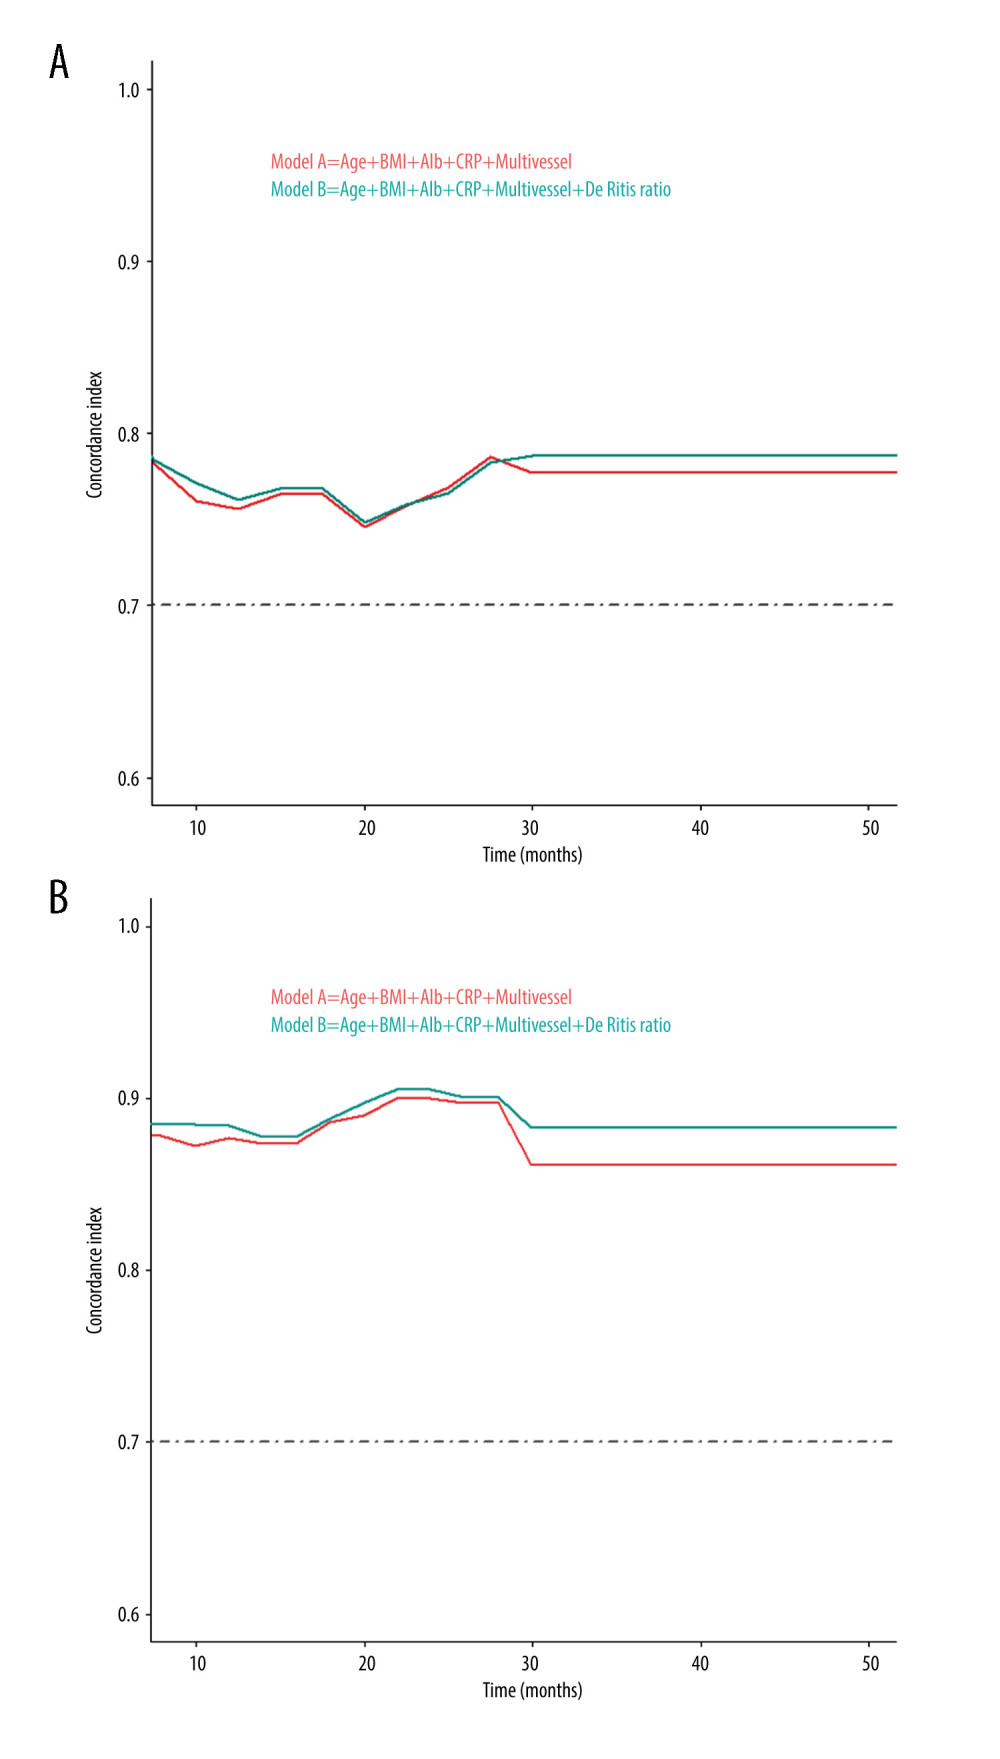 Concordance index of (A) major adverse cardiac and cerebrovascular events and (B) all-cause mortality predicted by model A and model B during the follow-up period. Created with R software (version 4.1.3; The R foundation for Statistical Computing, Vienna, Austria). Model A was fitted with age, BMI, albumin, C-reactive protein levels, and multivessel which have been proven to have prognostic value. Model B was a new model that introduced the De Ritis ratio to model A. BMI – body mass index; CRP – C-reactive protein; Alb – serum albumin; Multivessel – multivessel lesion.